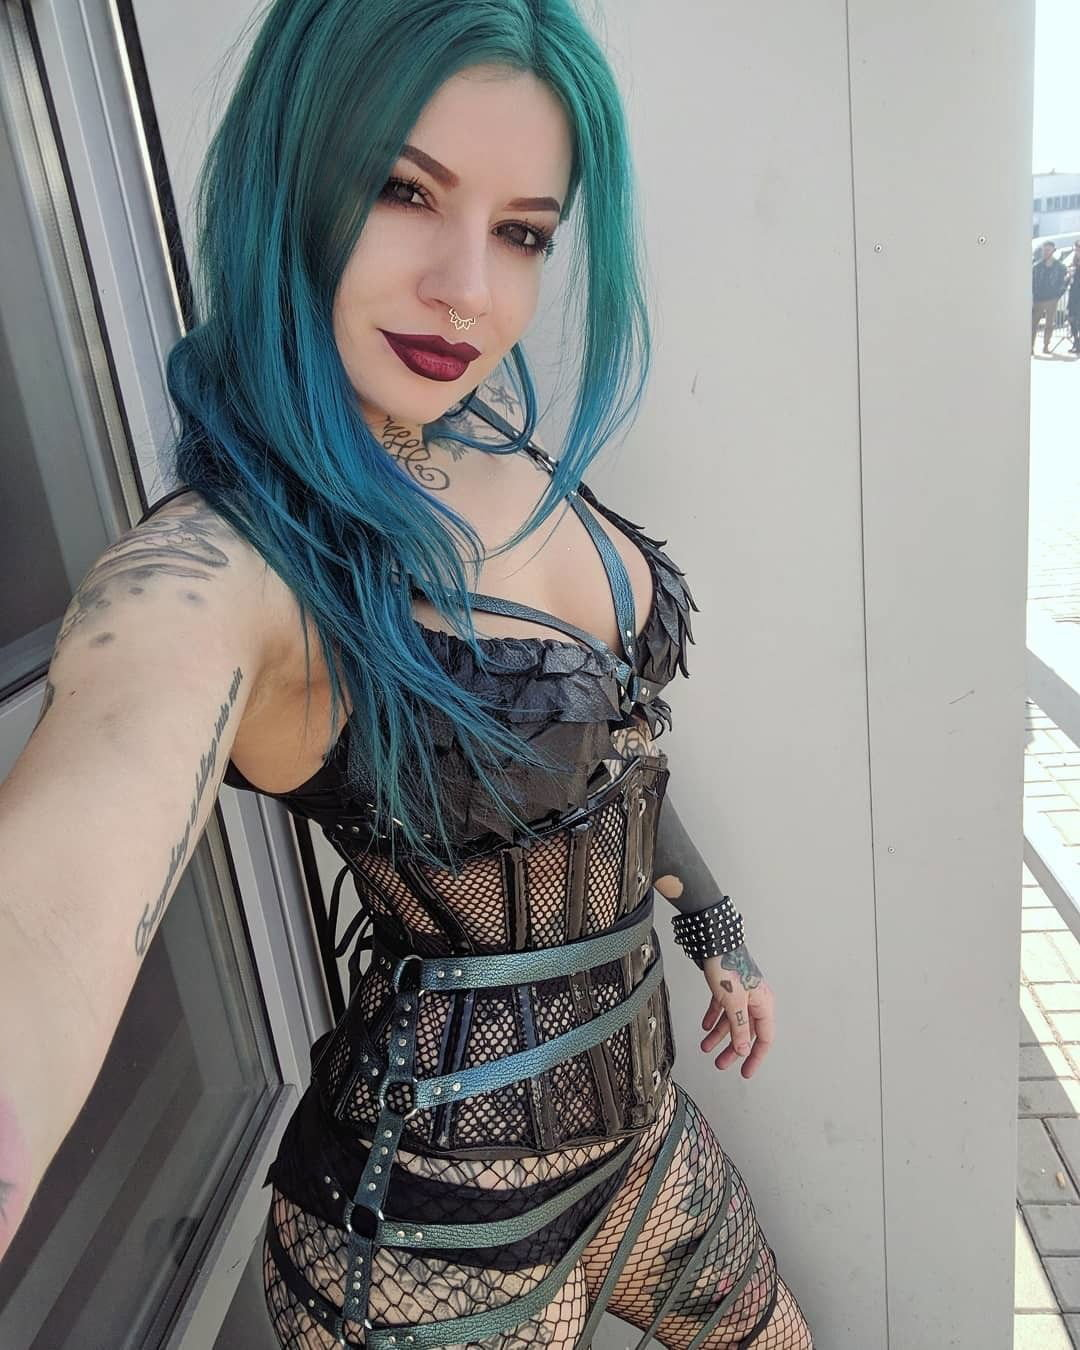 Watch the Photo by Devynsdogg with the username @Devynsdogg, posted on April 6, 2019 and the text says 'Usually these girls don't come out in the sunlight. #bdsm #bdsmfemdomgirl #sexylingerie #tattoo #babes #sexyfemales #beautifulgirls #neonhair..'